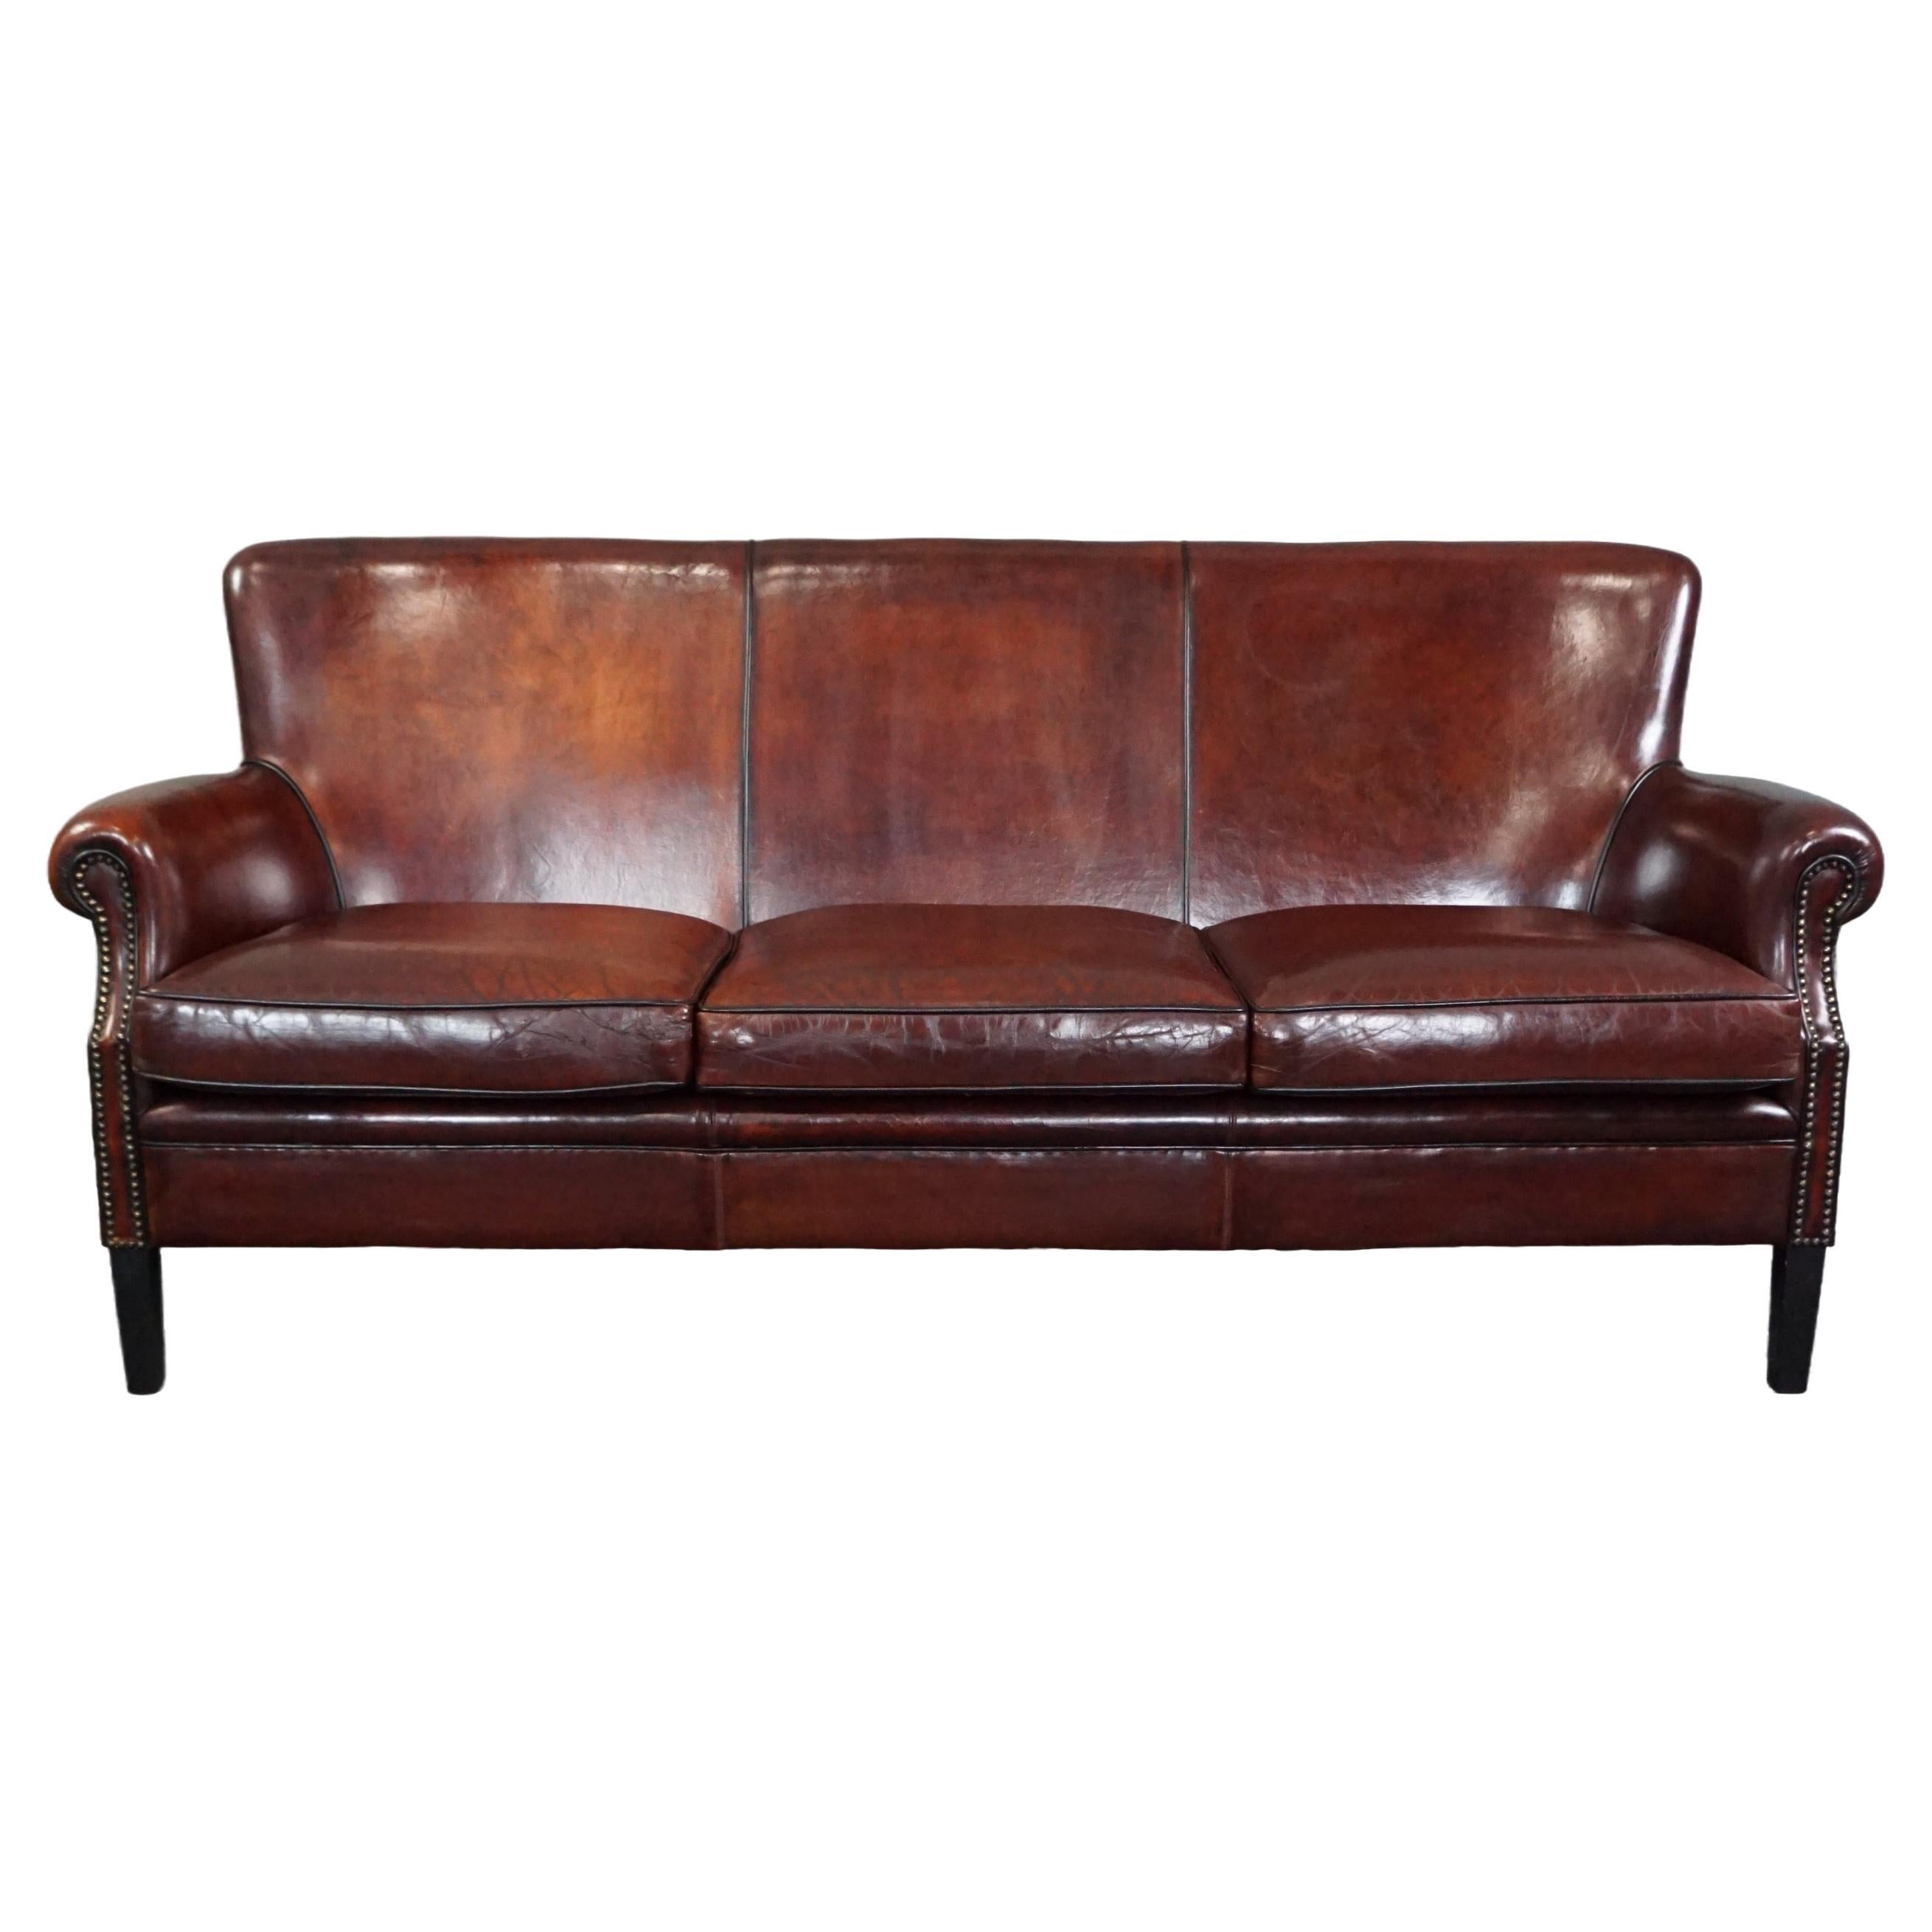 Sheep leather sofa finished with black piping, 3 seater For Sale